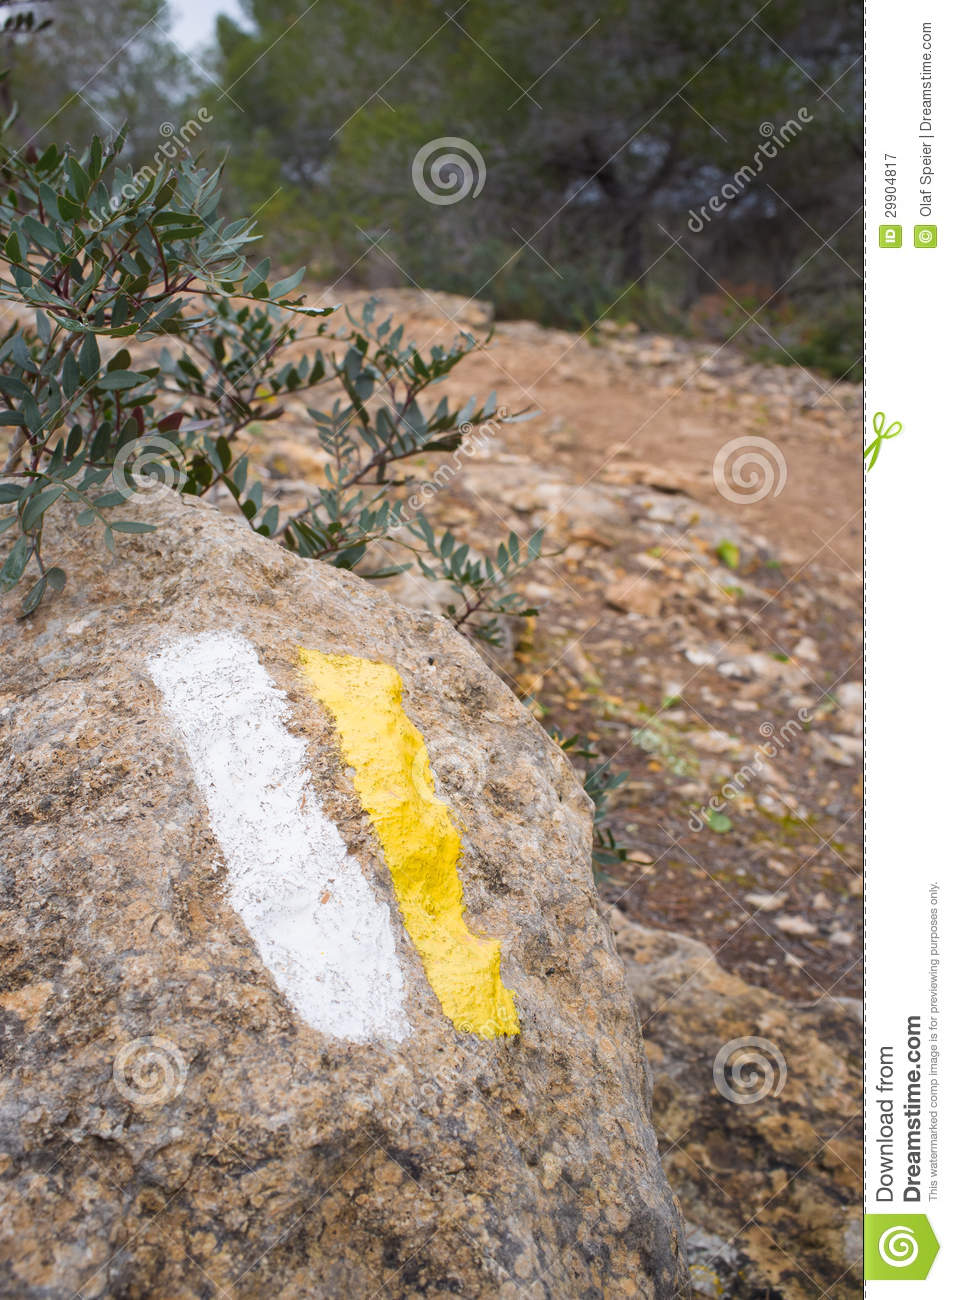 Trail Marker Painted On Rocky Soil With The Hiking Trail In The    